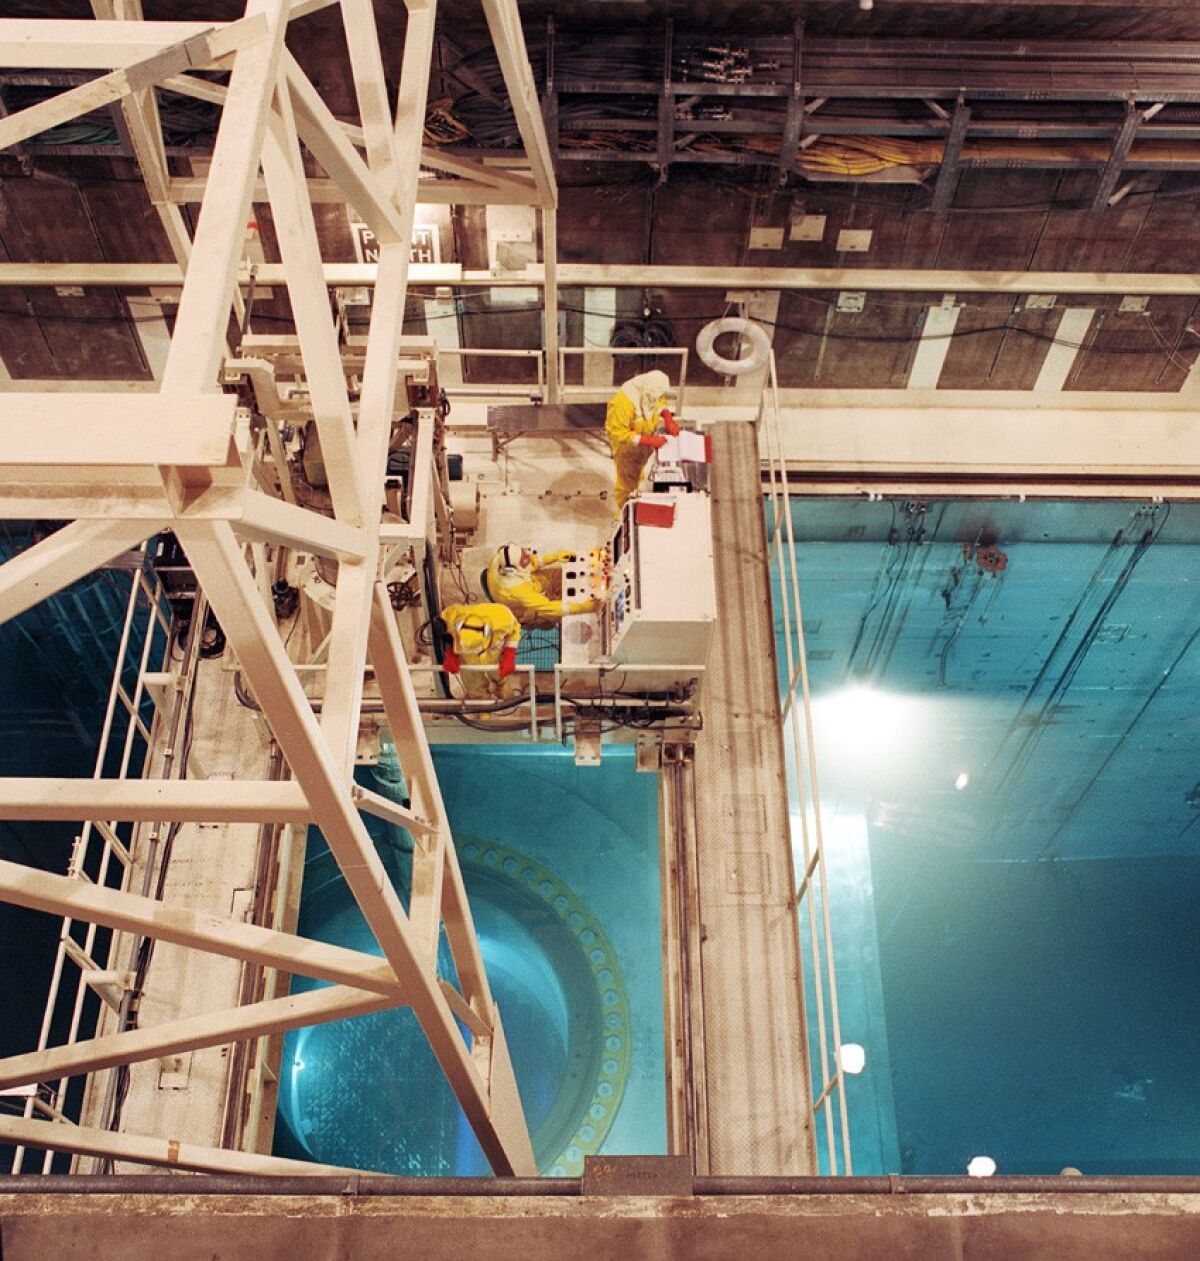 The reactor cavity in one of the containment domes at the San Onofre Nuclear Generating Station when it is filled with water.